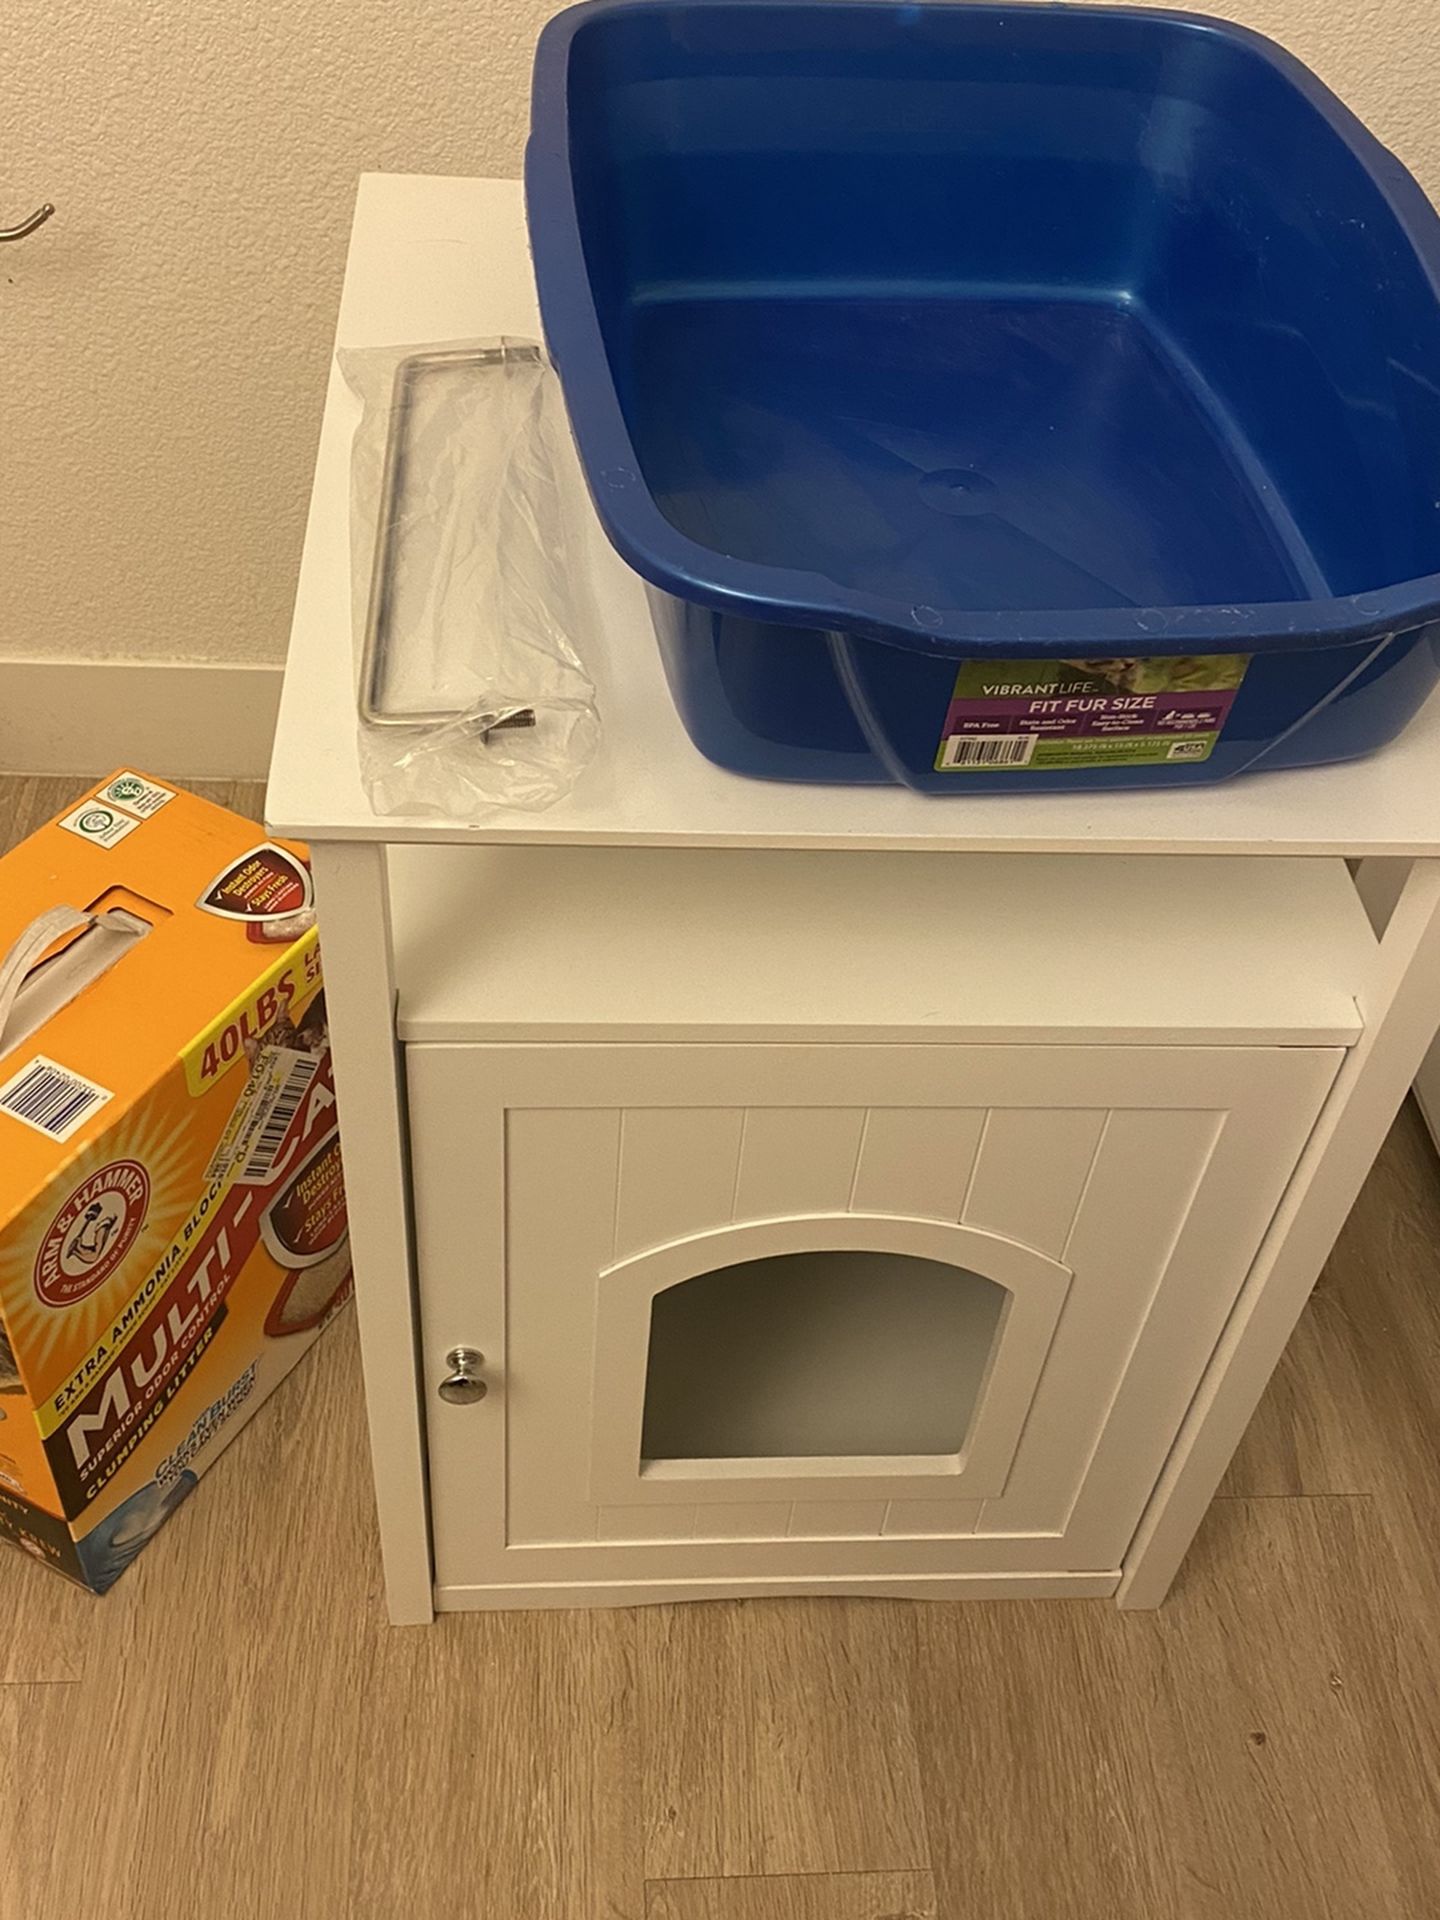 Litter box Enclosure With Litter box And Litter.